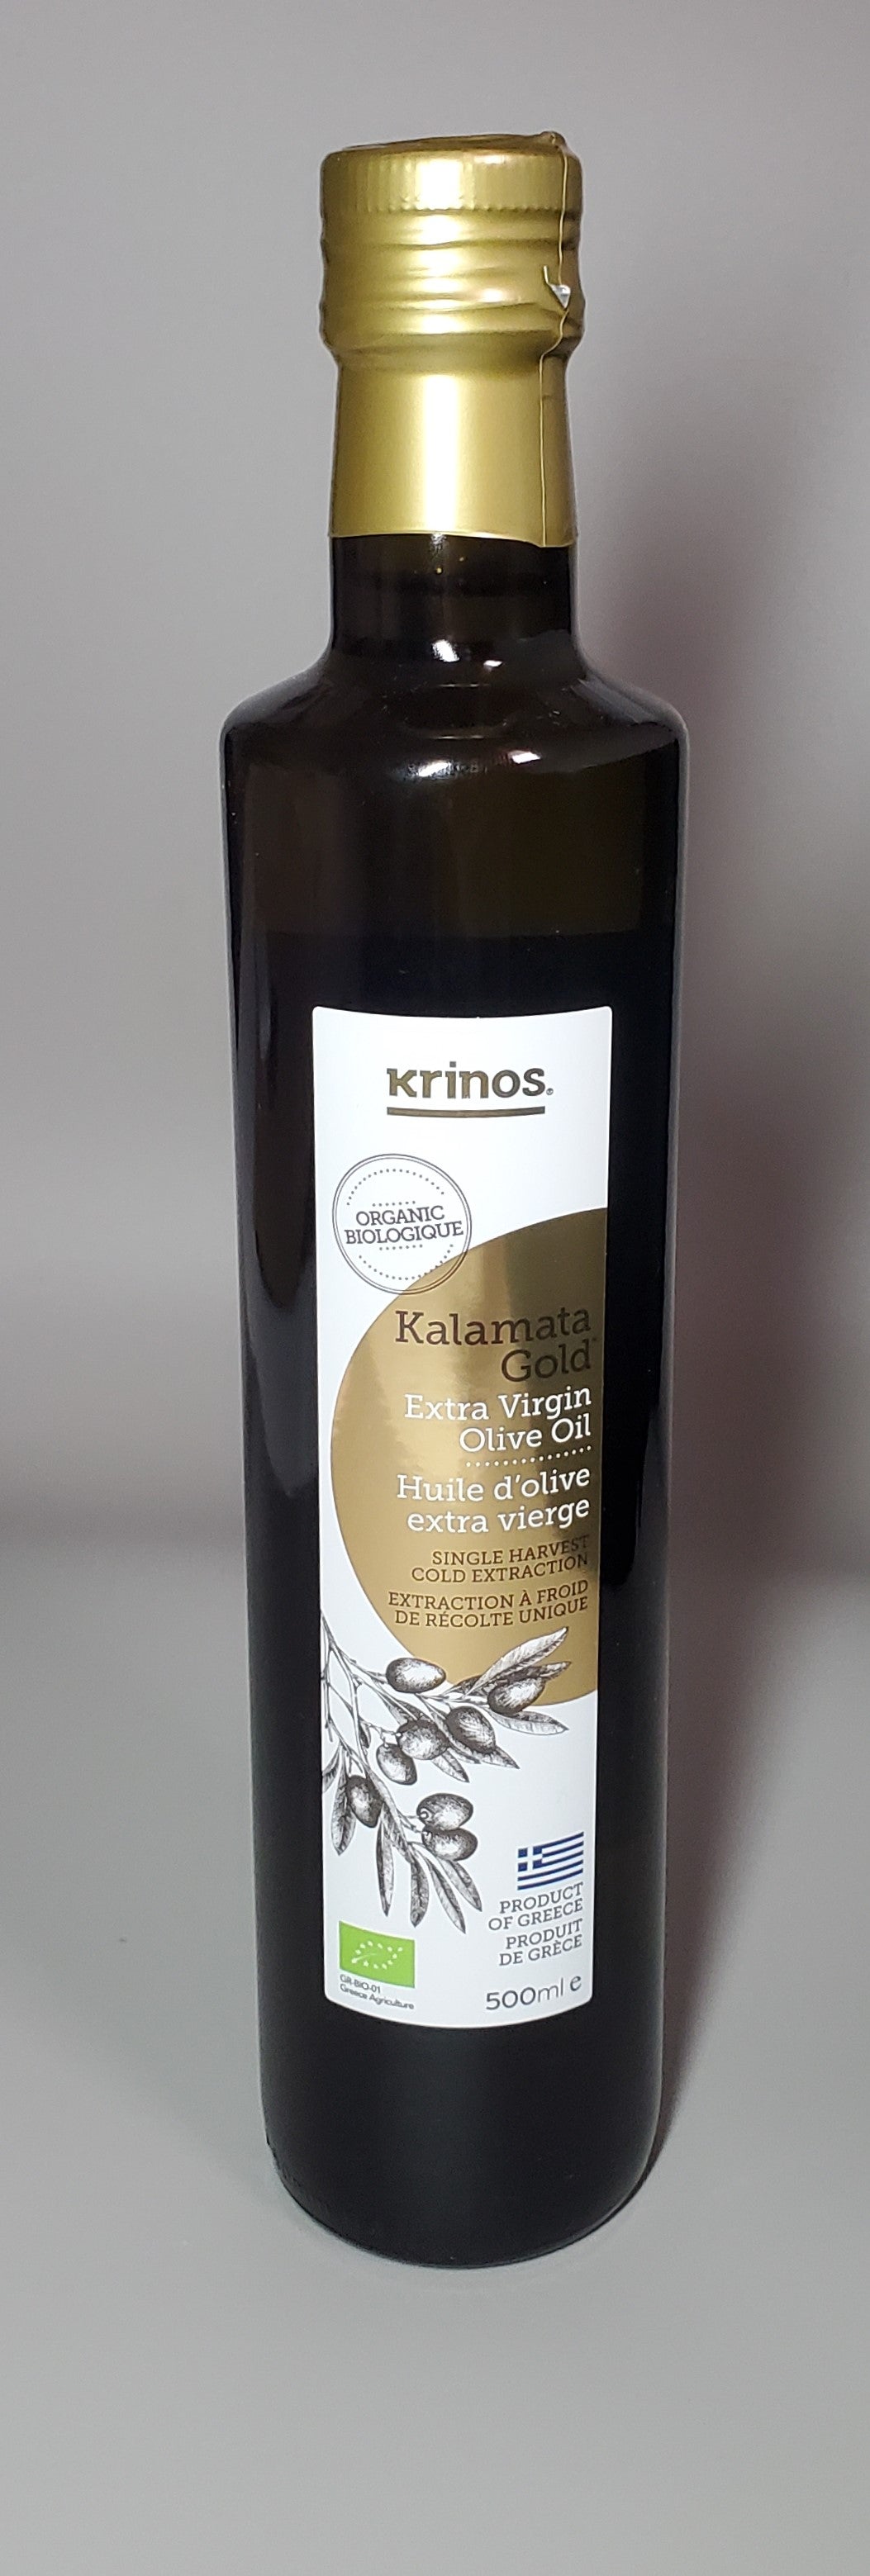 Krinos Organic Kalamata Gold Extra Virgin Olive Oil  500 ml Hand Picked Olives  - Huile d'Olive